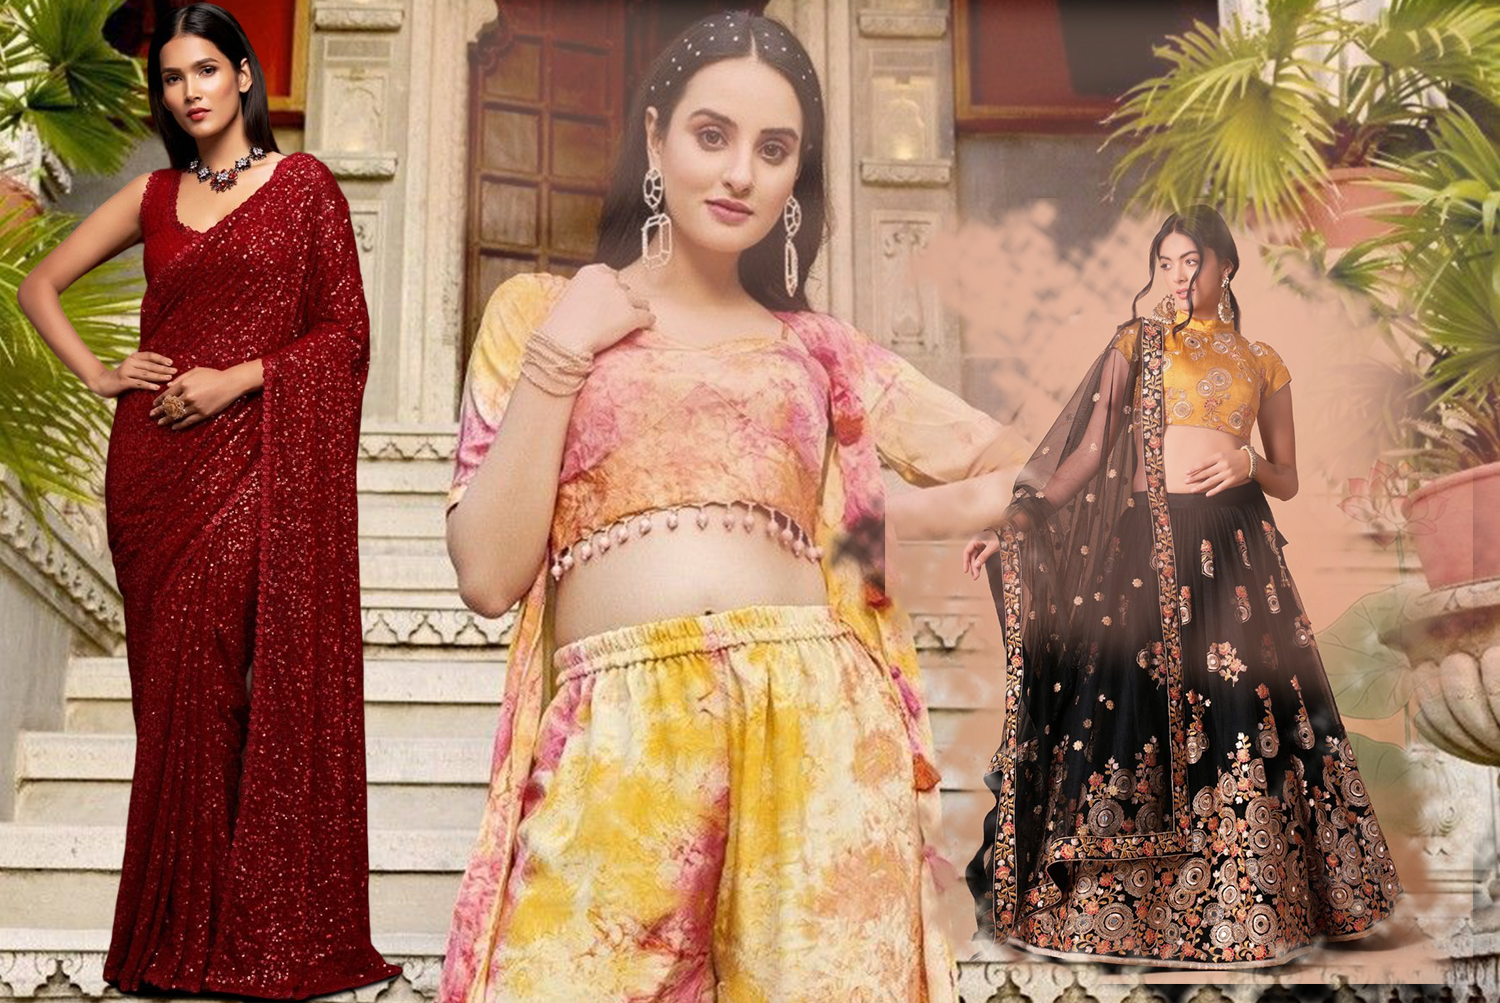 The Trend of Indian Clothing In Wedding